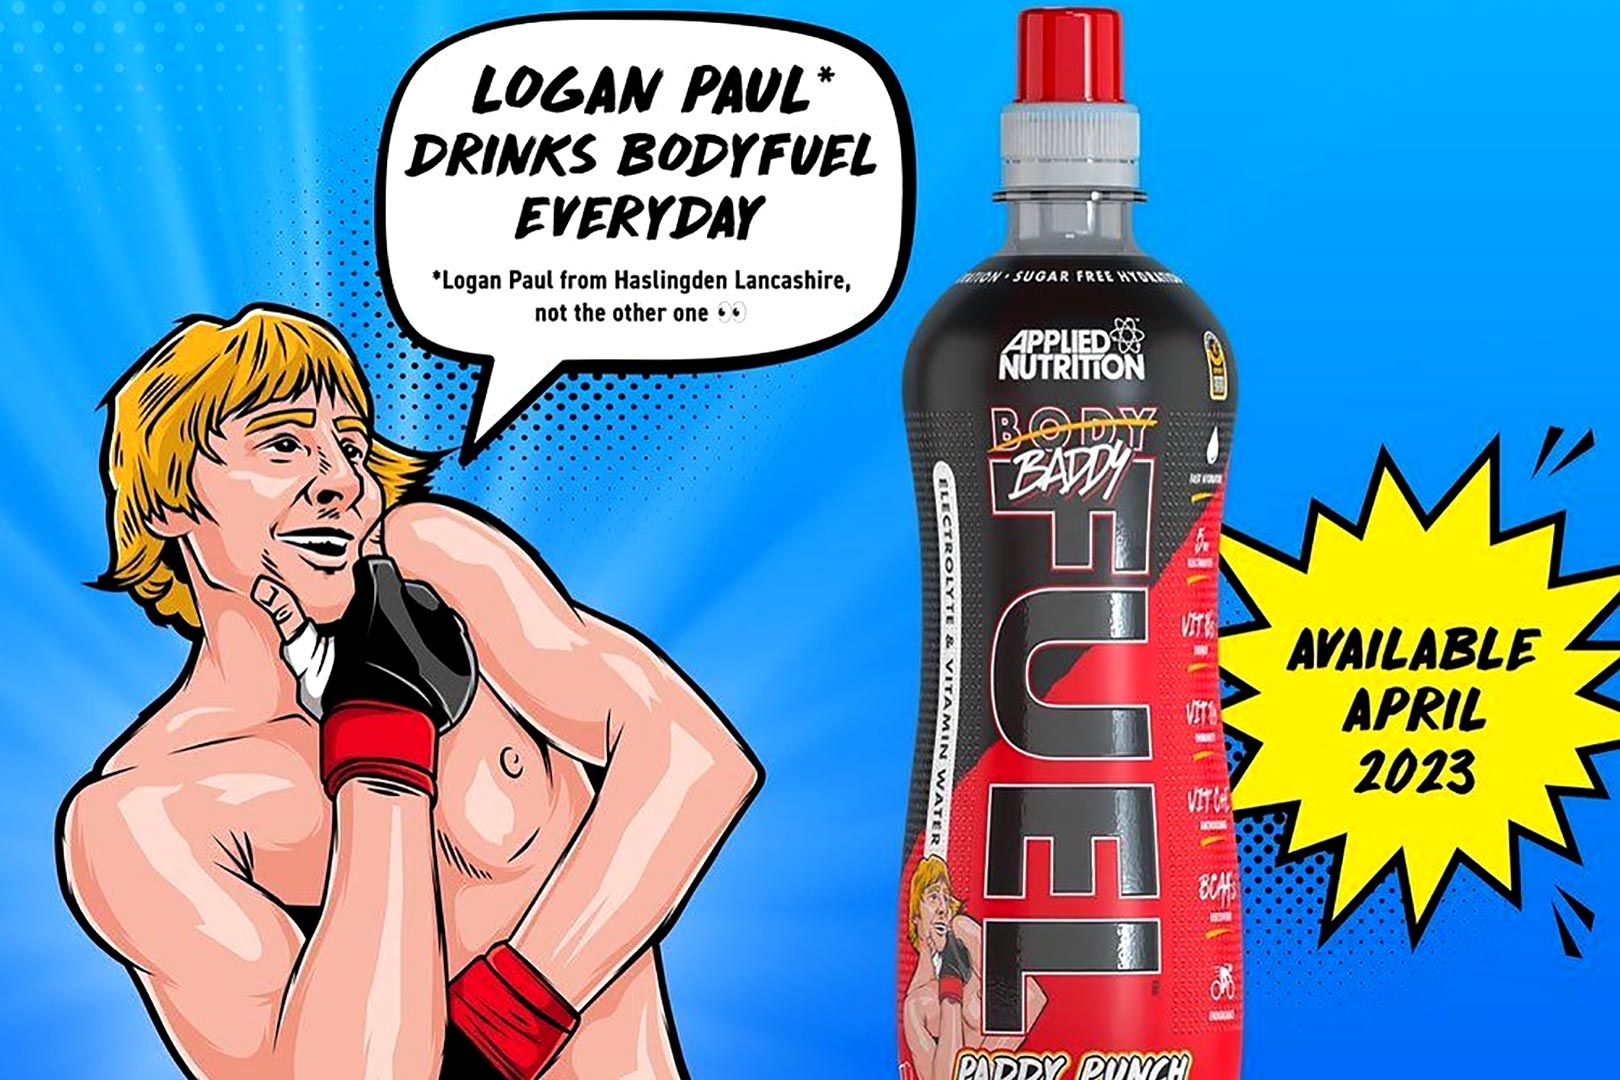 Applied says Logan Paul drinks Bodyfuel alongside the reveal of its second Paddy collab